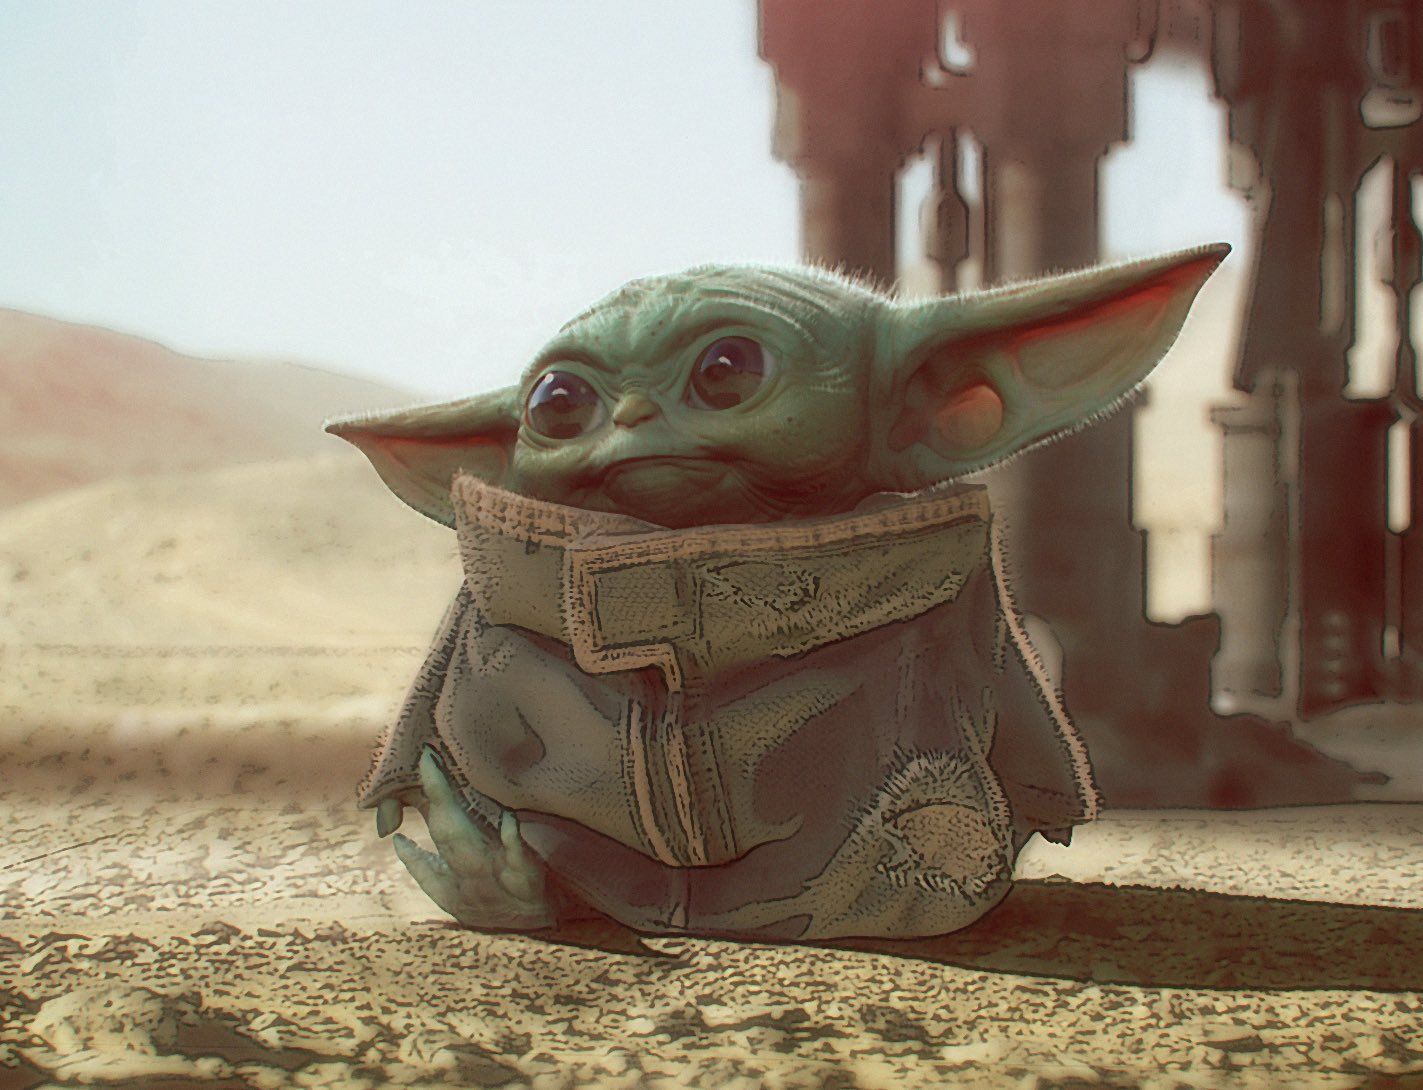 The Mandalorian's “Baby Yoda” Merchandise is Both Adorable and Frustrating. Designs & Ideas on Dornob